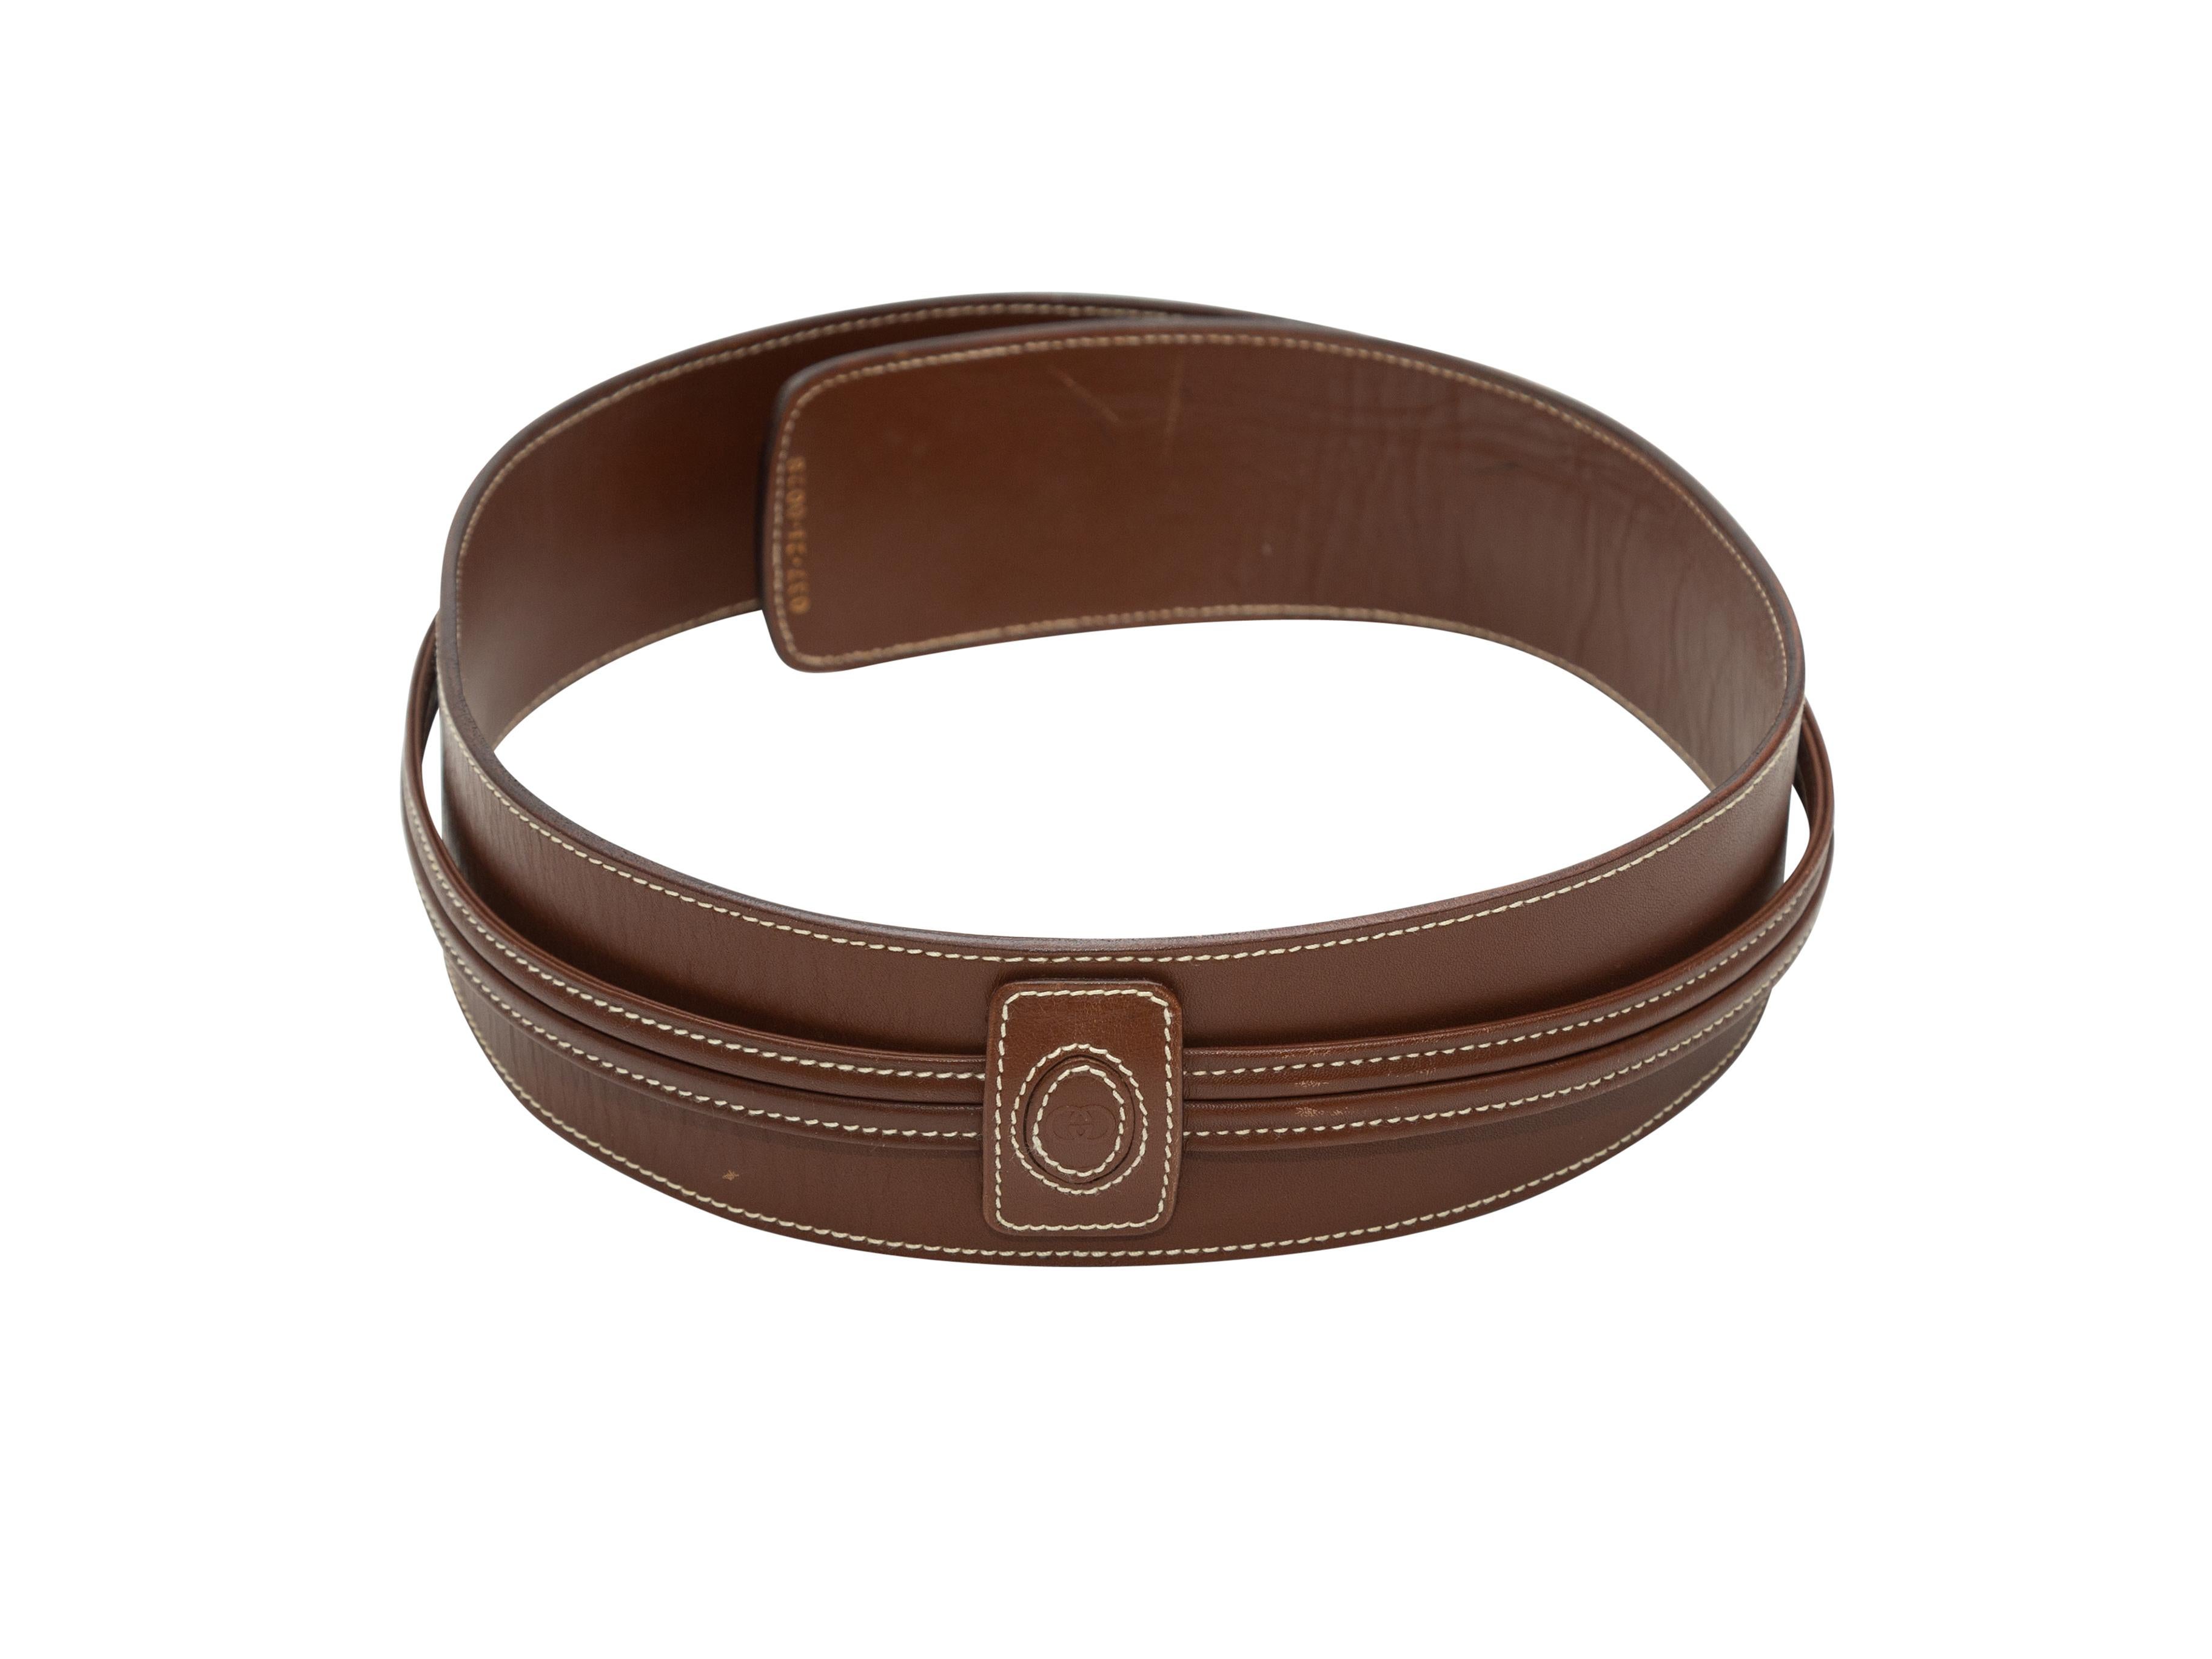 Women's Gucci Brown Leather Belt